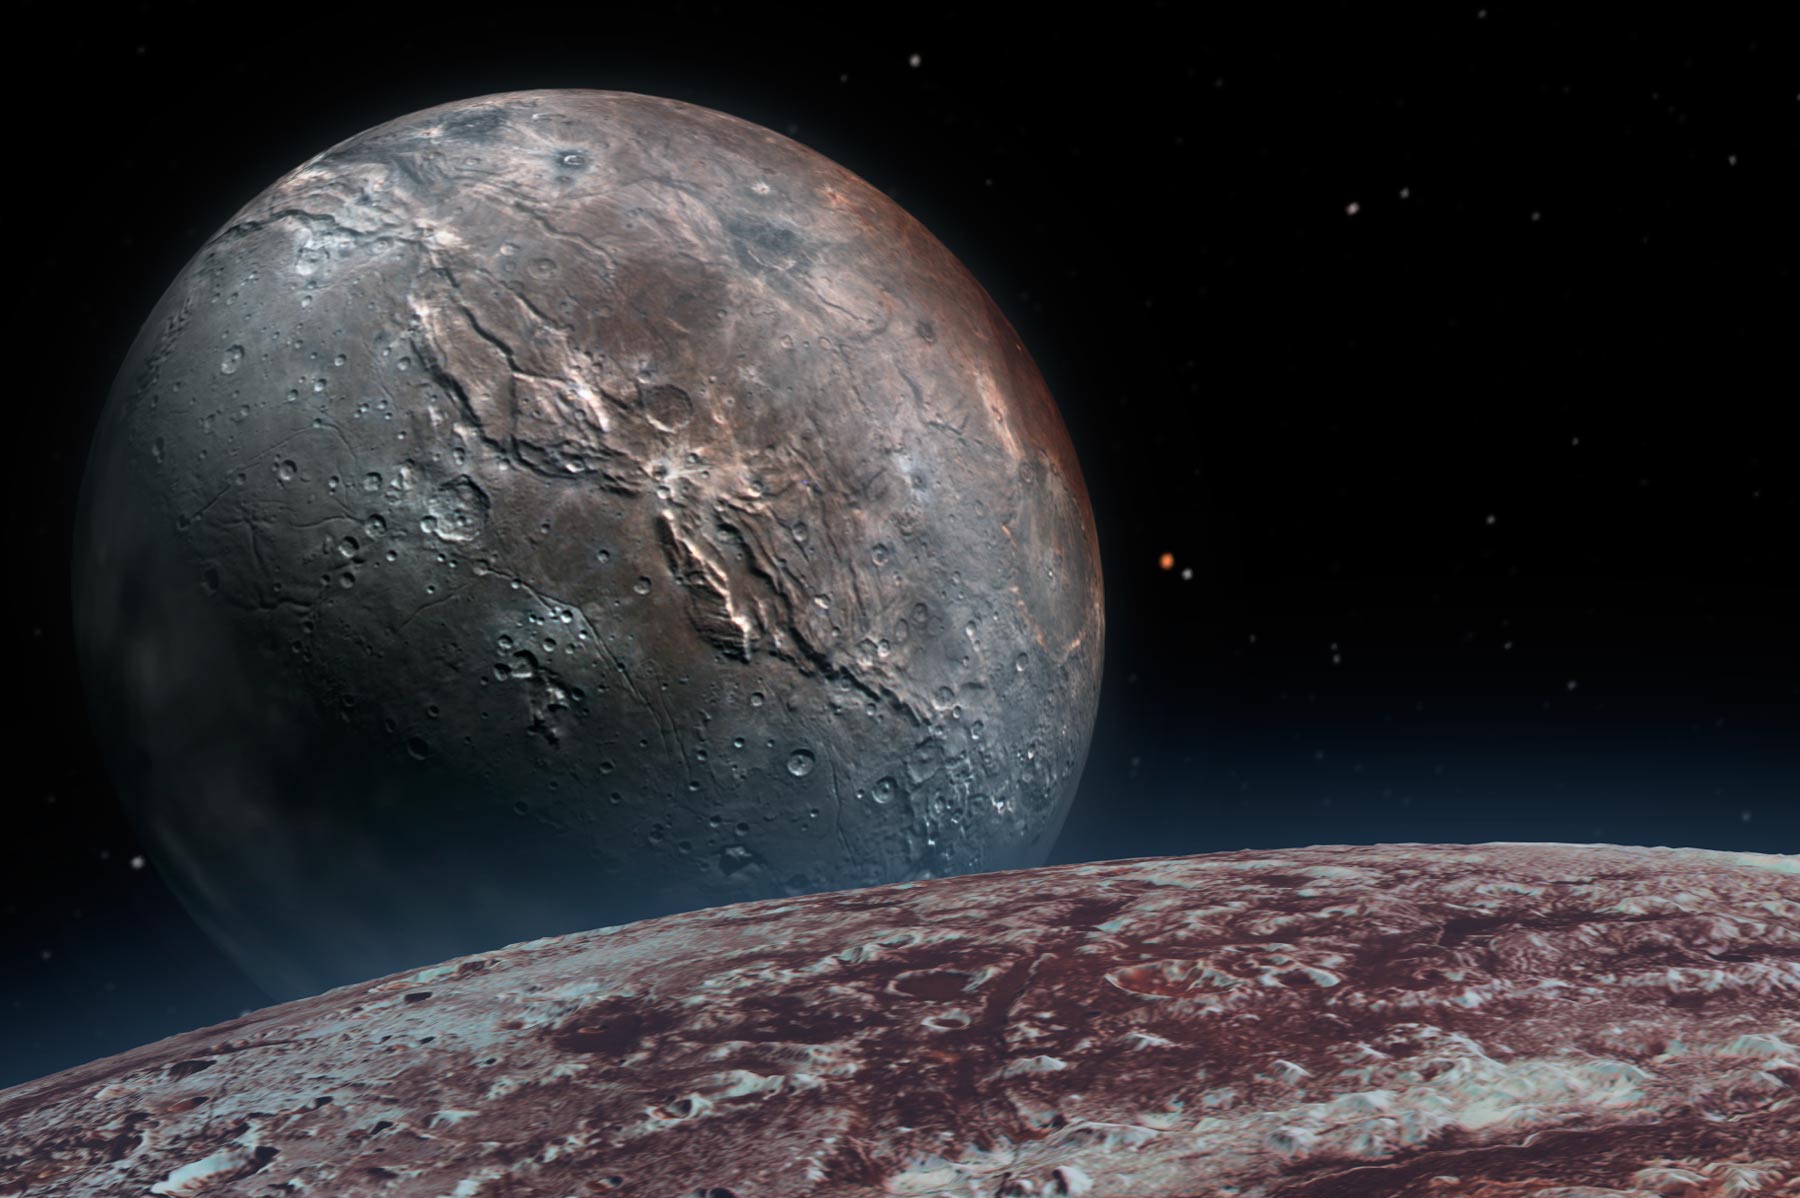 Tour 3D Pluto in New Portable Virtual-Reality View